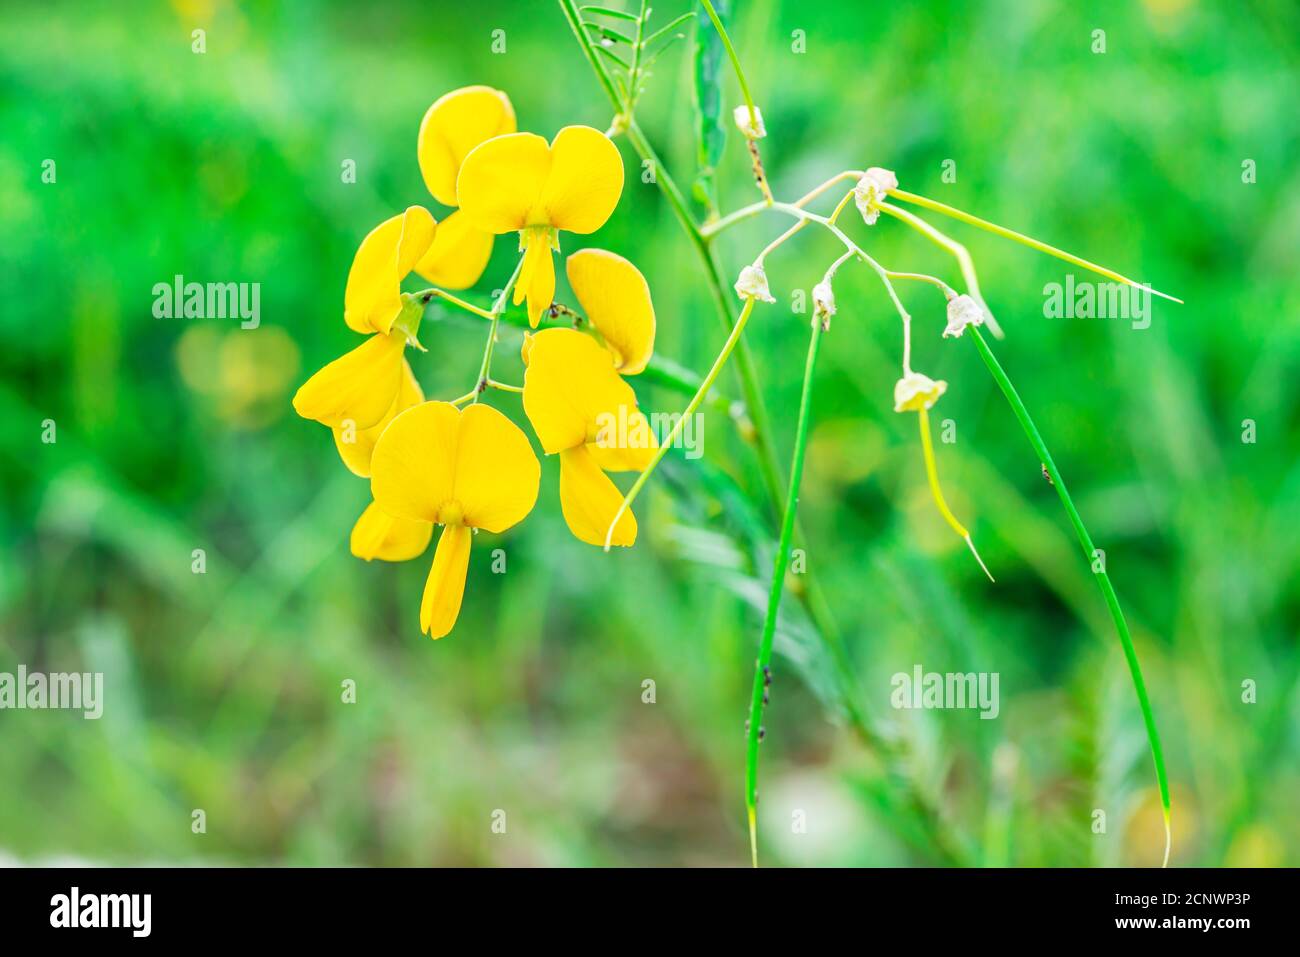 Faboideae or fabaceae, Rural yellow flower on blurred green nature background Stock Photo